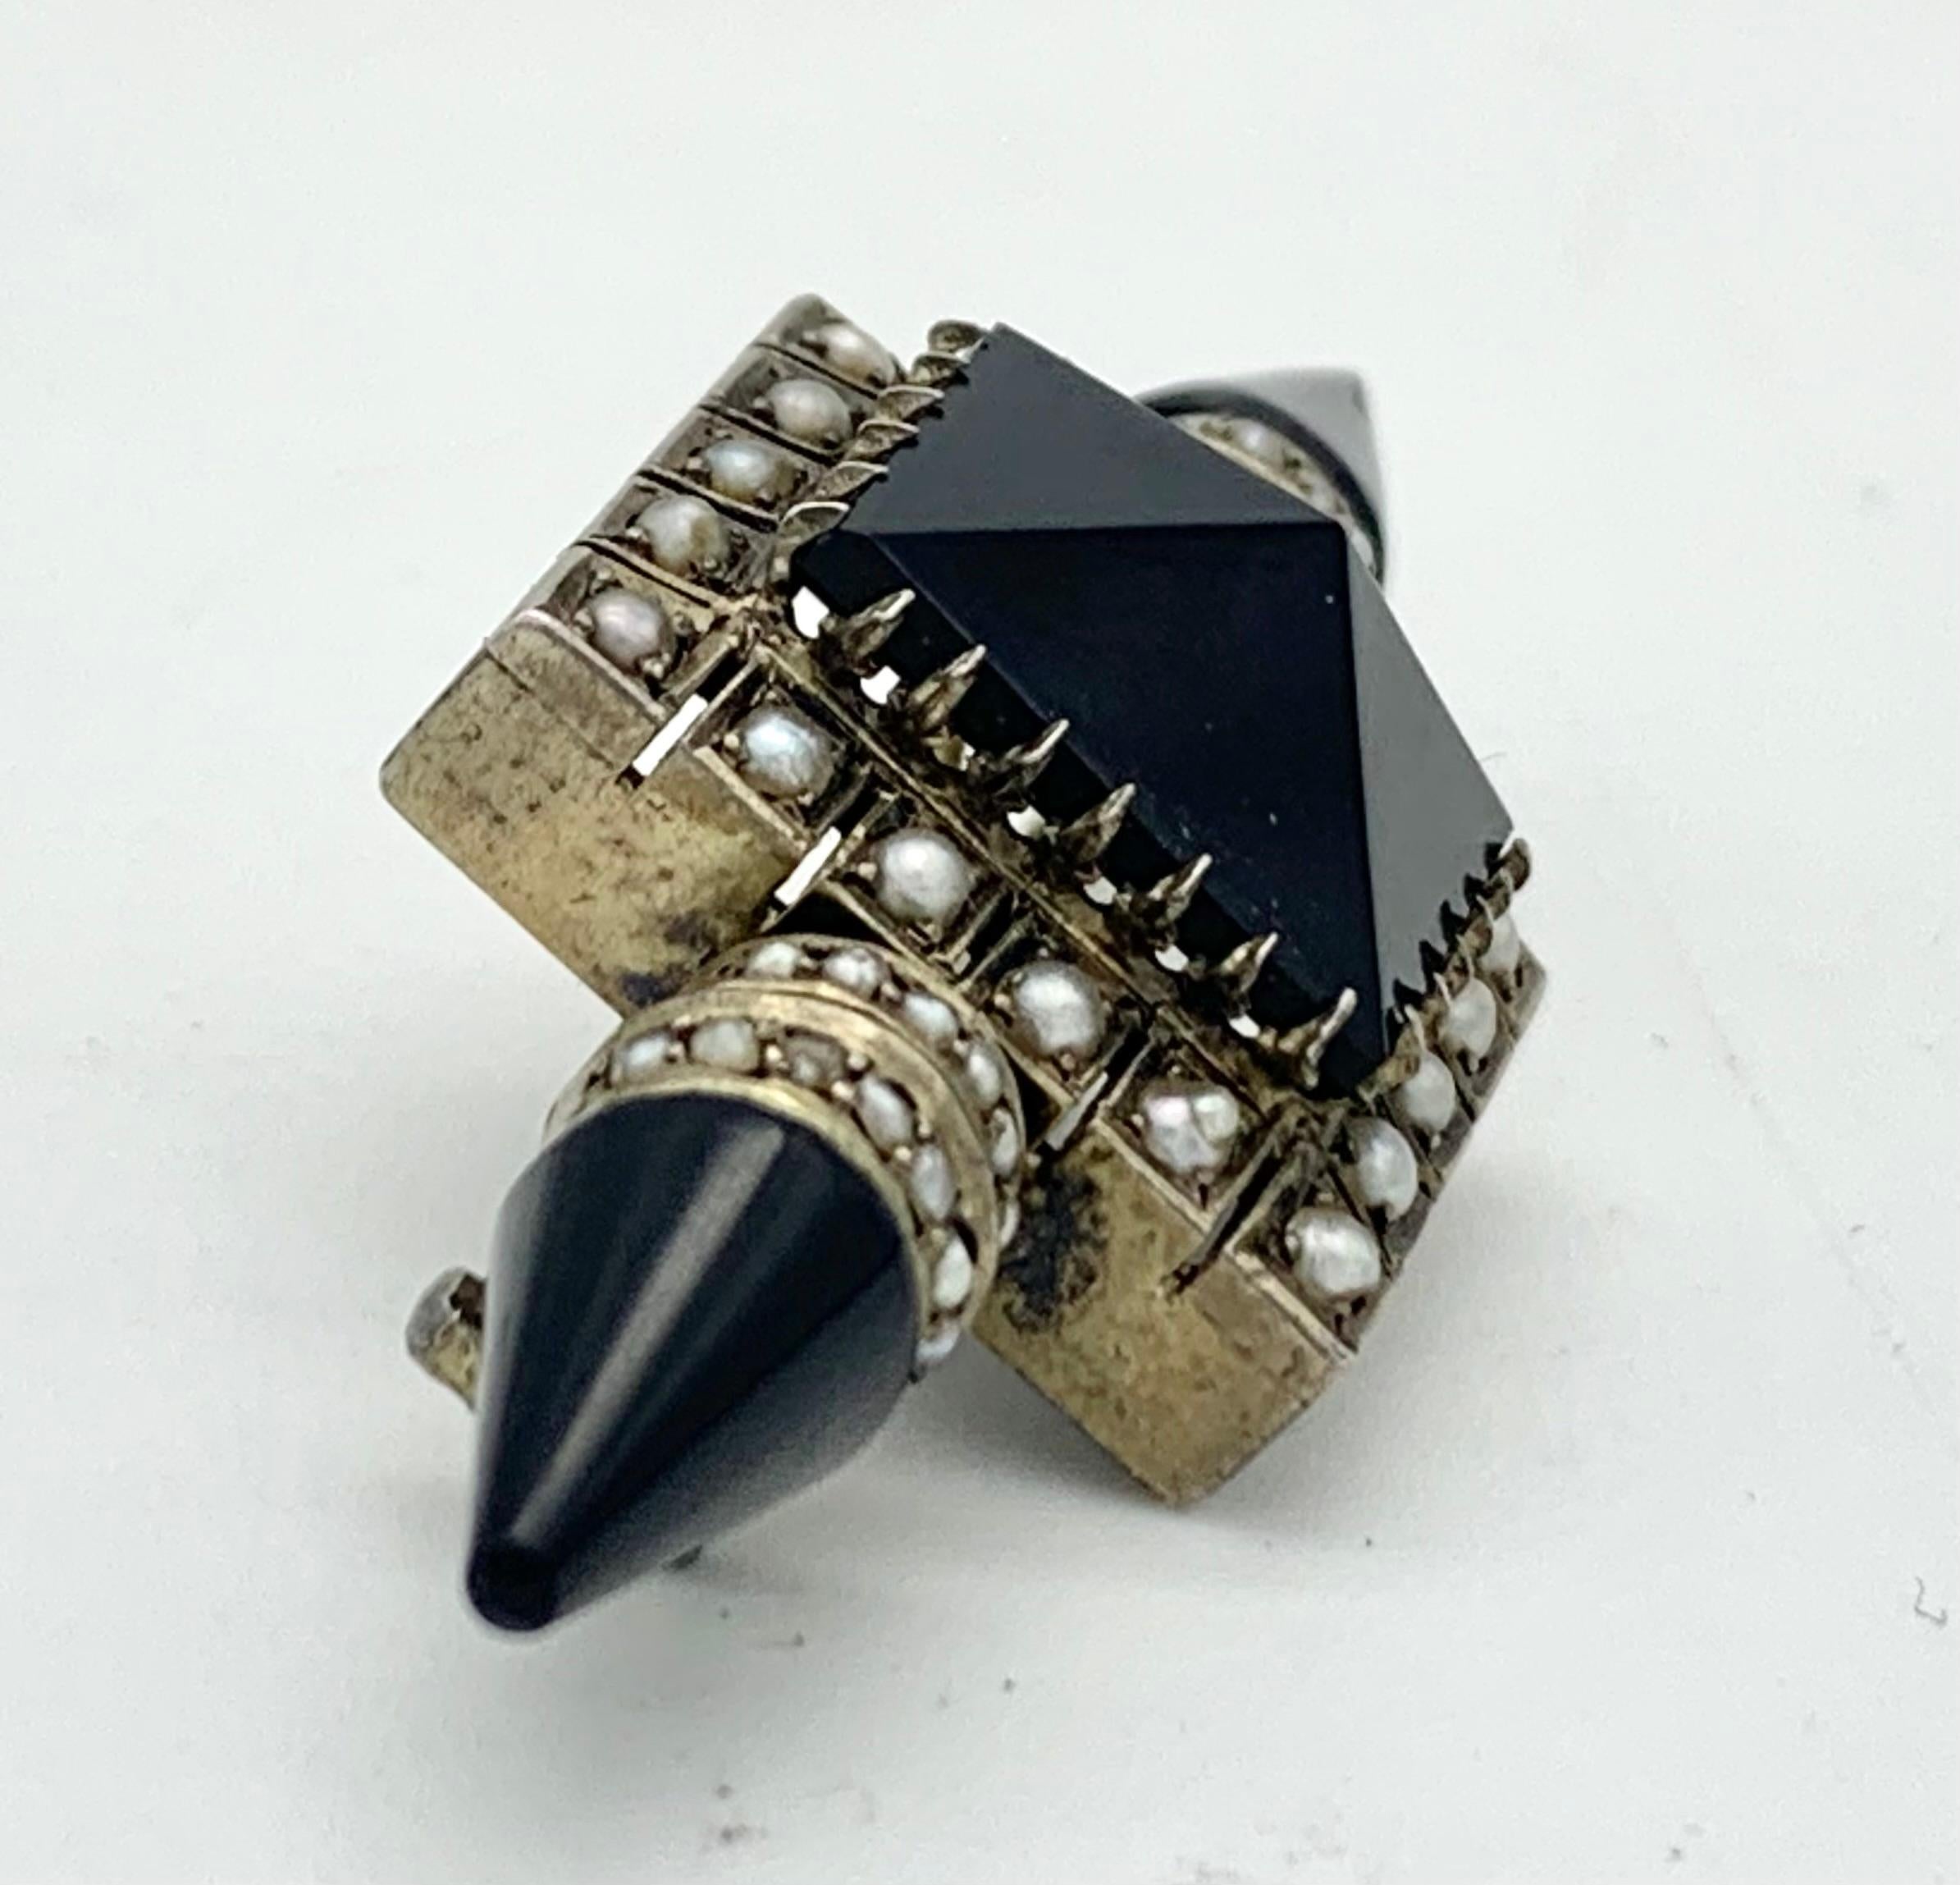 The brooch was handcrafted in 1880 ca. In the center of this extravagant piece of jeweller we see a large rectangular pyramid shaped onyx in a claw set frame set with eighteen seed pearls.  Two conical cut pieces of onyx are mounted on circular